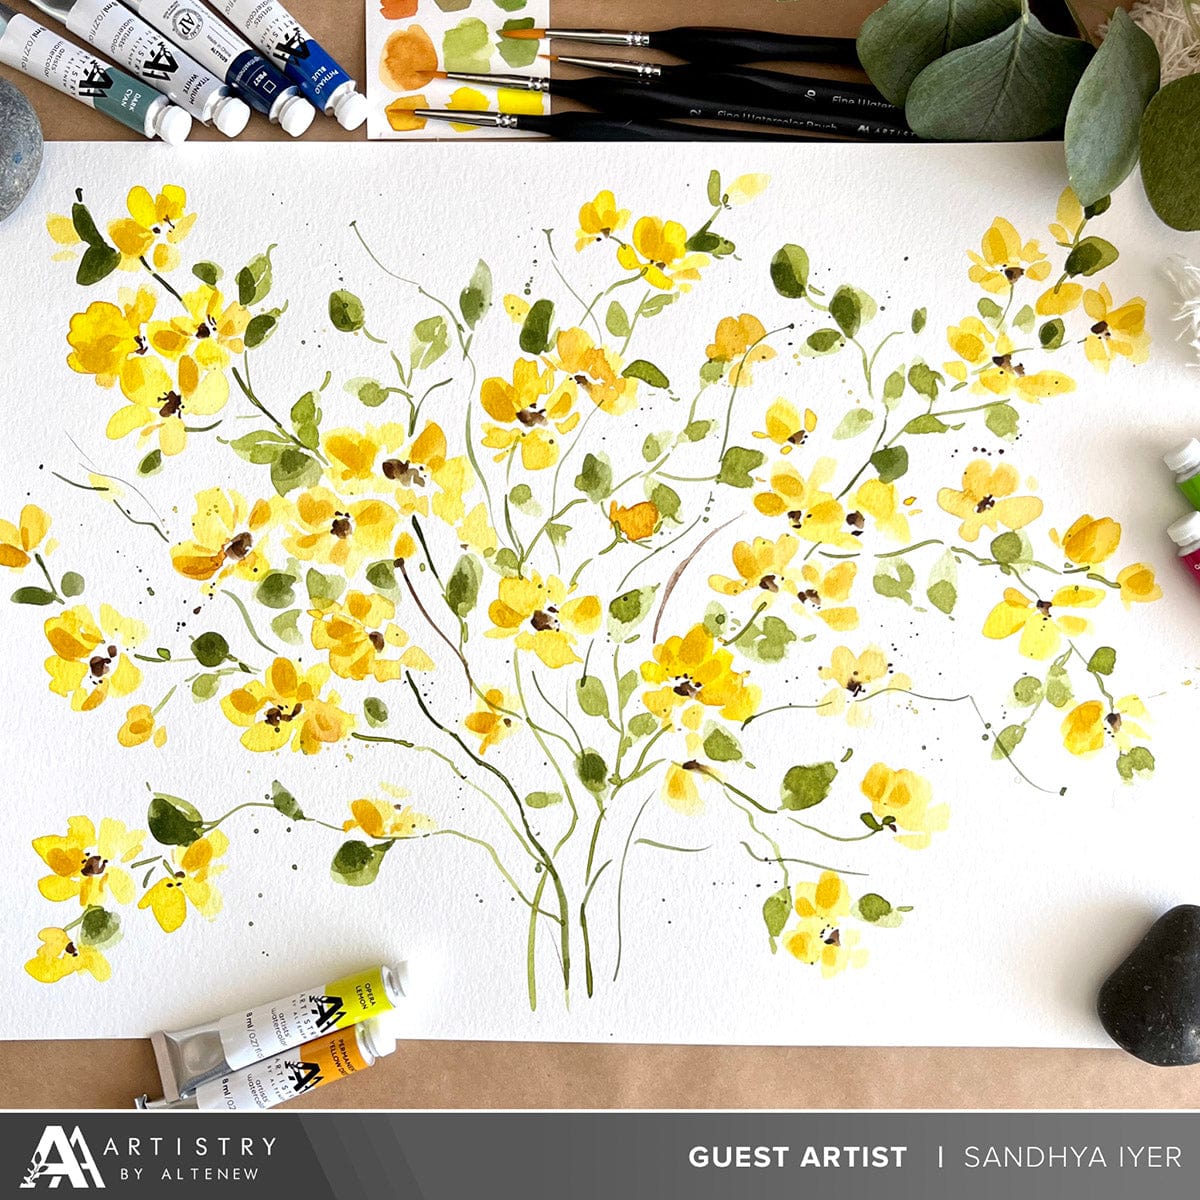 Artist-Grade Watercoloring Products  Artistry by Altenew –  ArtistrybyAltenew